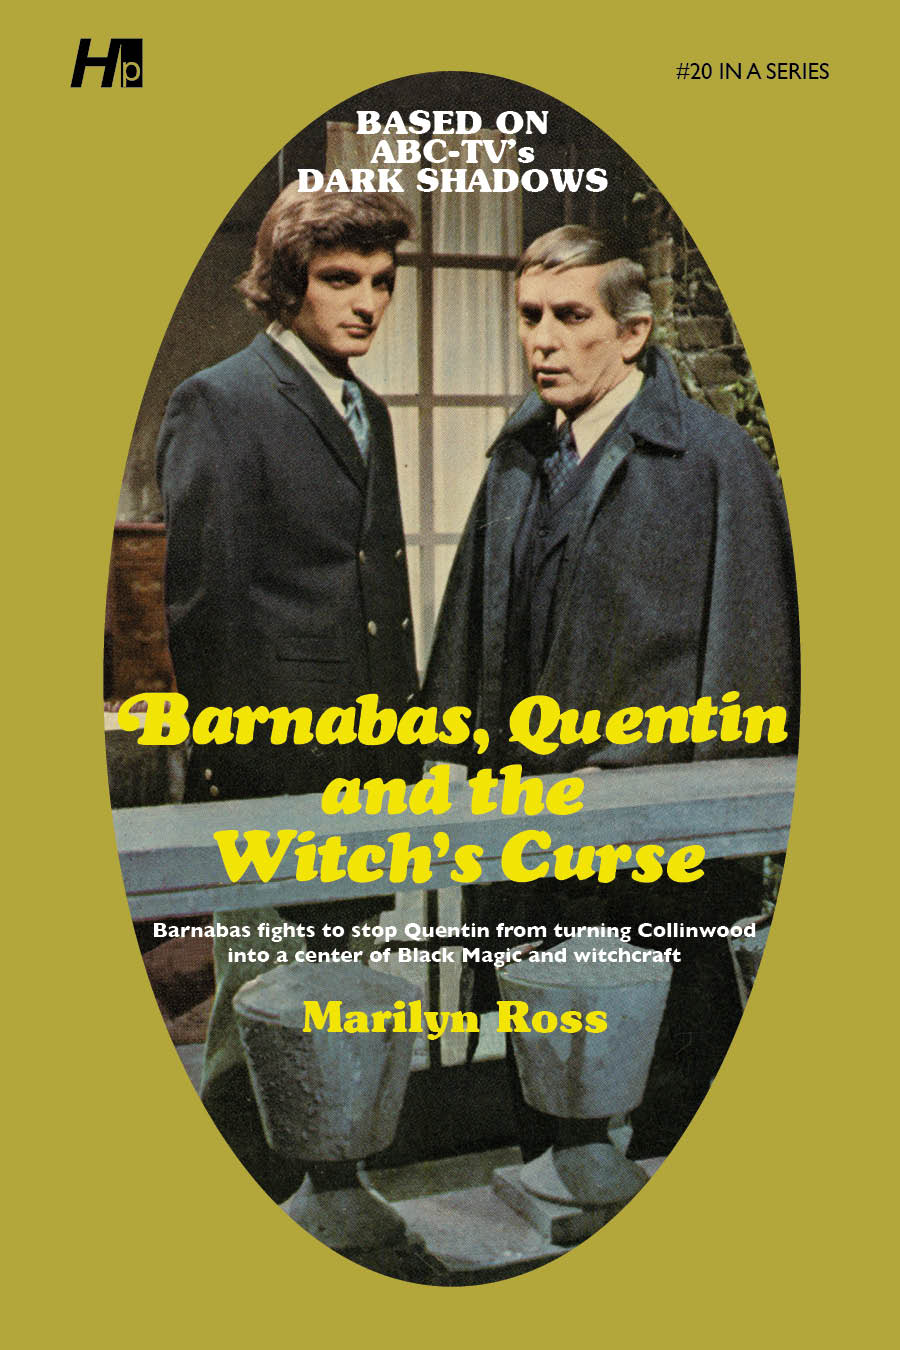 Dark Shadows #20: Barnabas, Quentin and the Witch's Curse [Paperback]